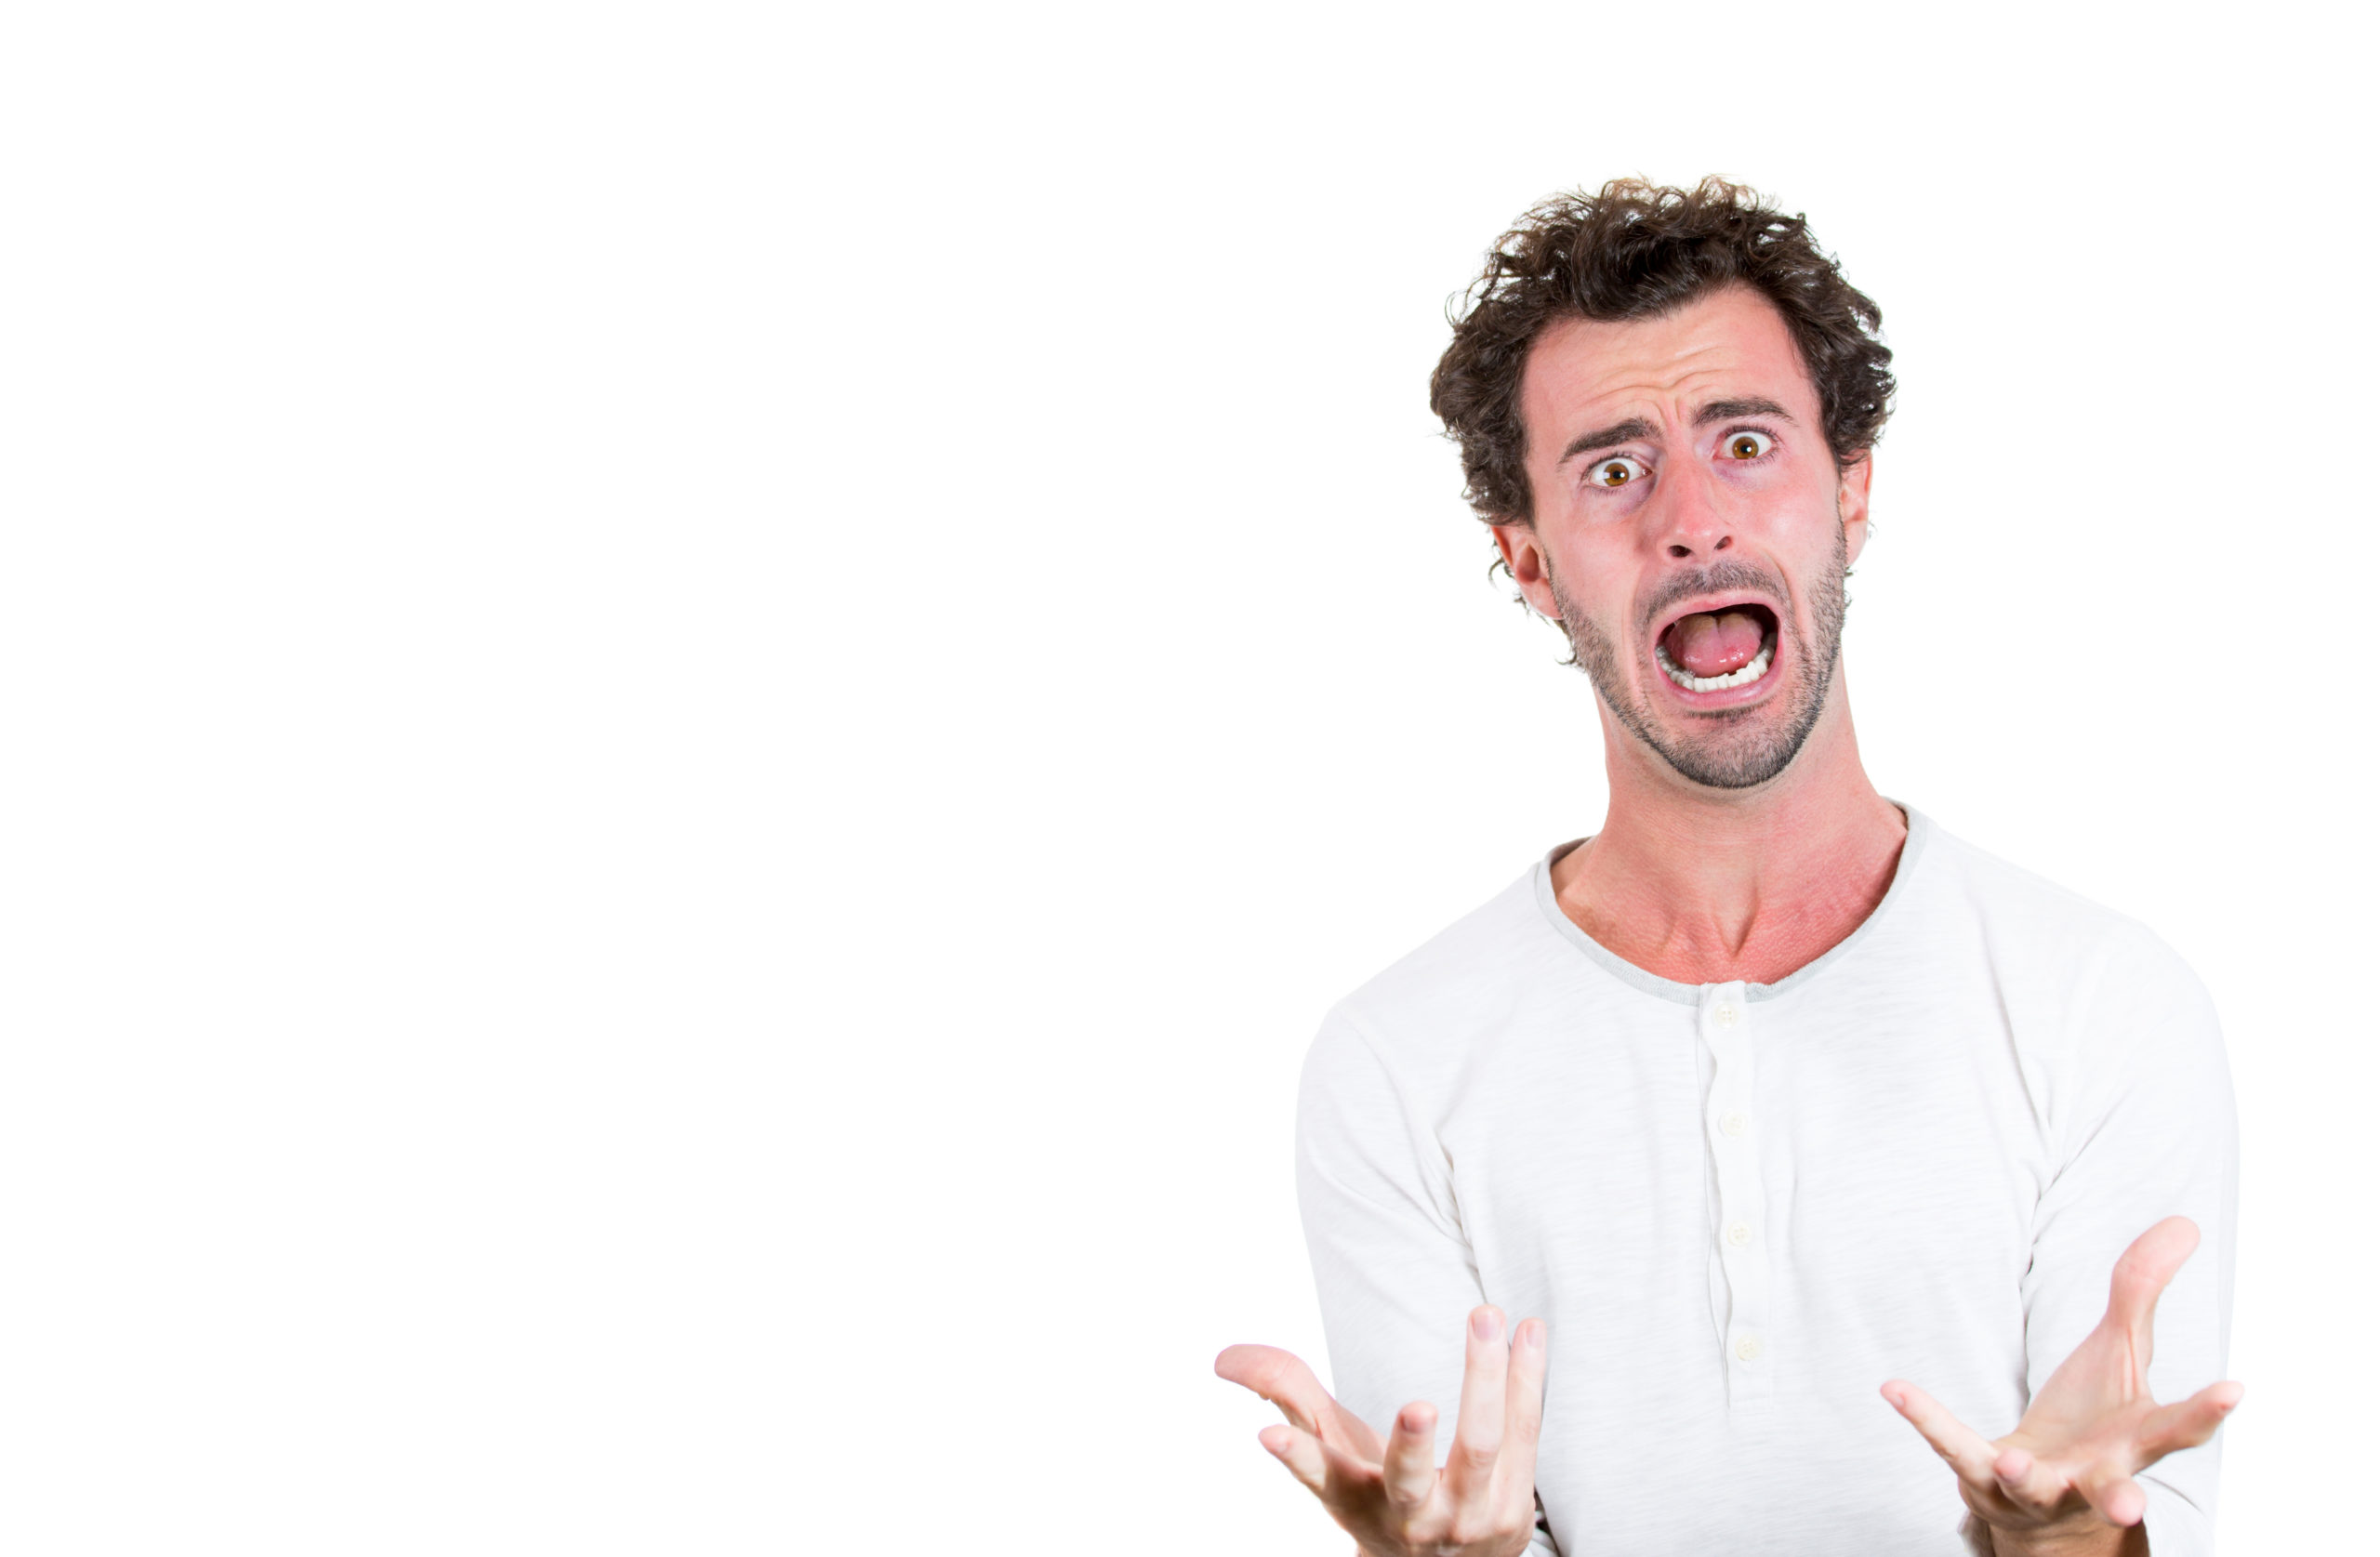 Man with open mouth and hands held out in front looking frustrated